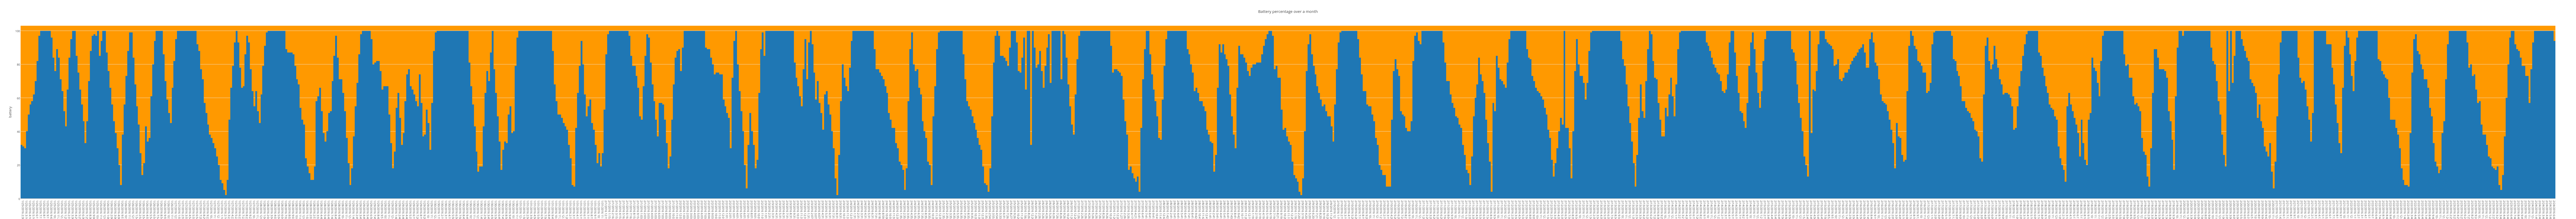 Battery percentage over a month | bar chart made by Blotzik | plotly